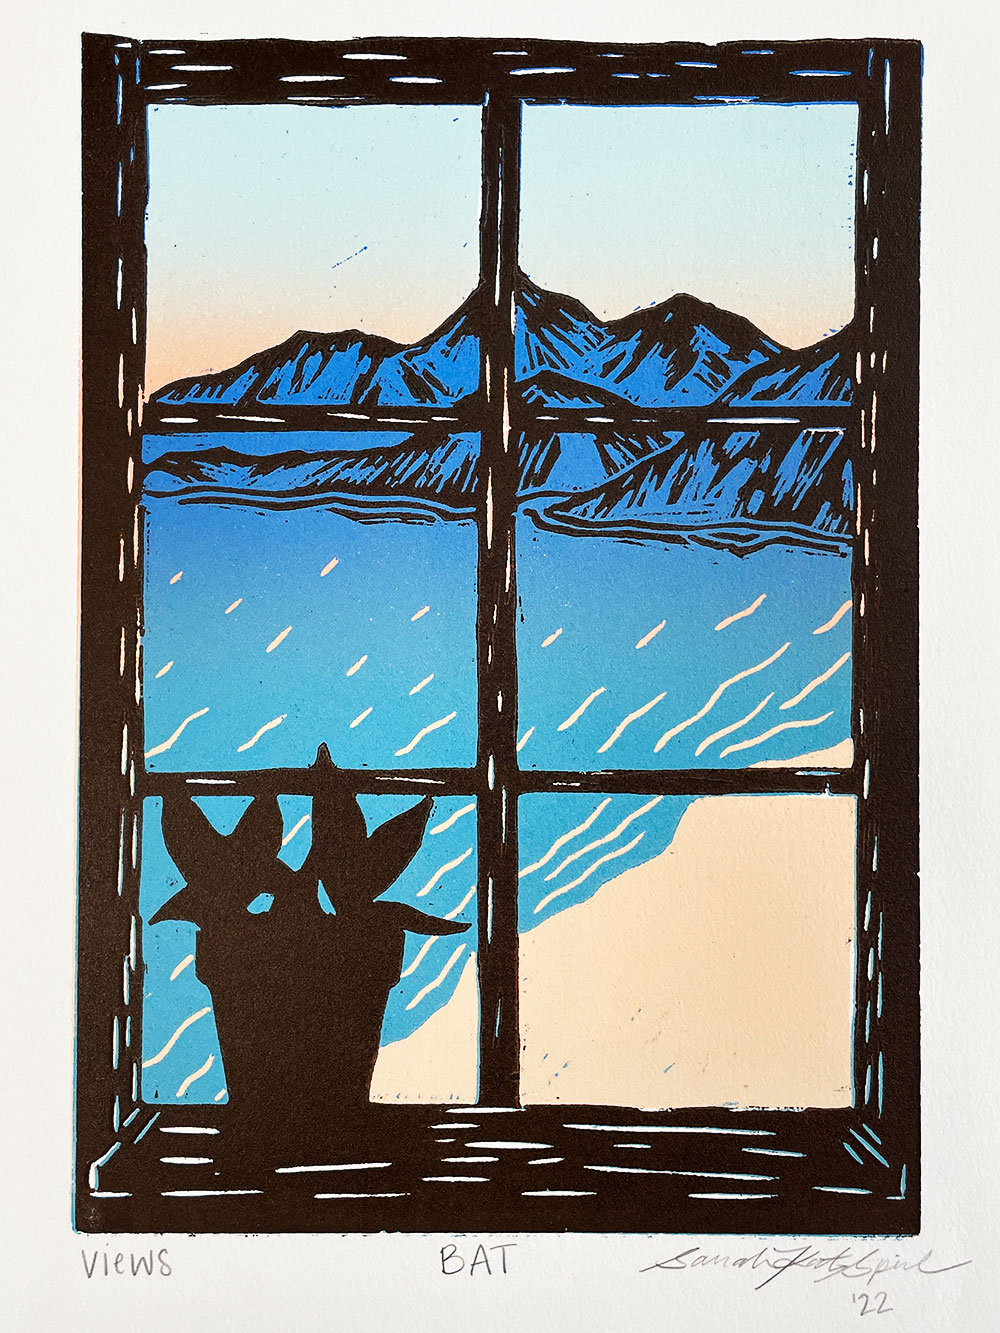 A printed image composed of a plant resting on a window seal overlooking the sea and the mountains - printed using shades of blues and browns. 